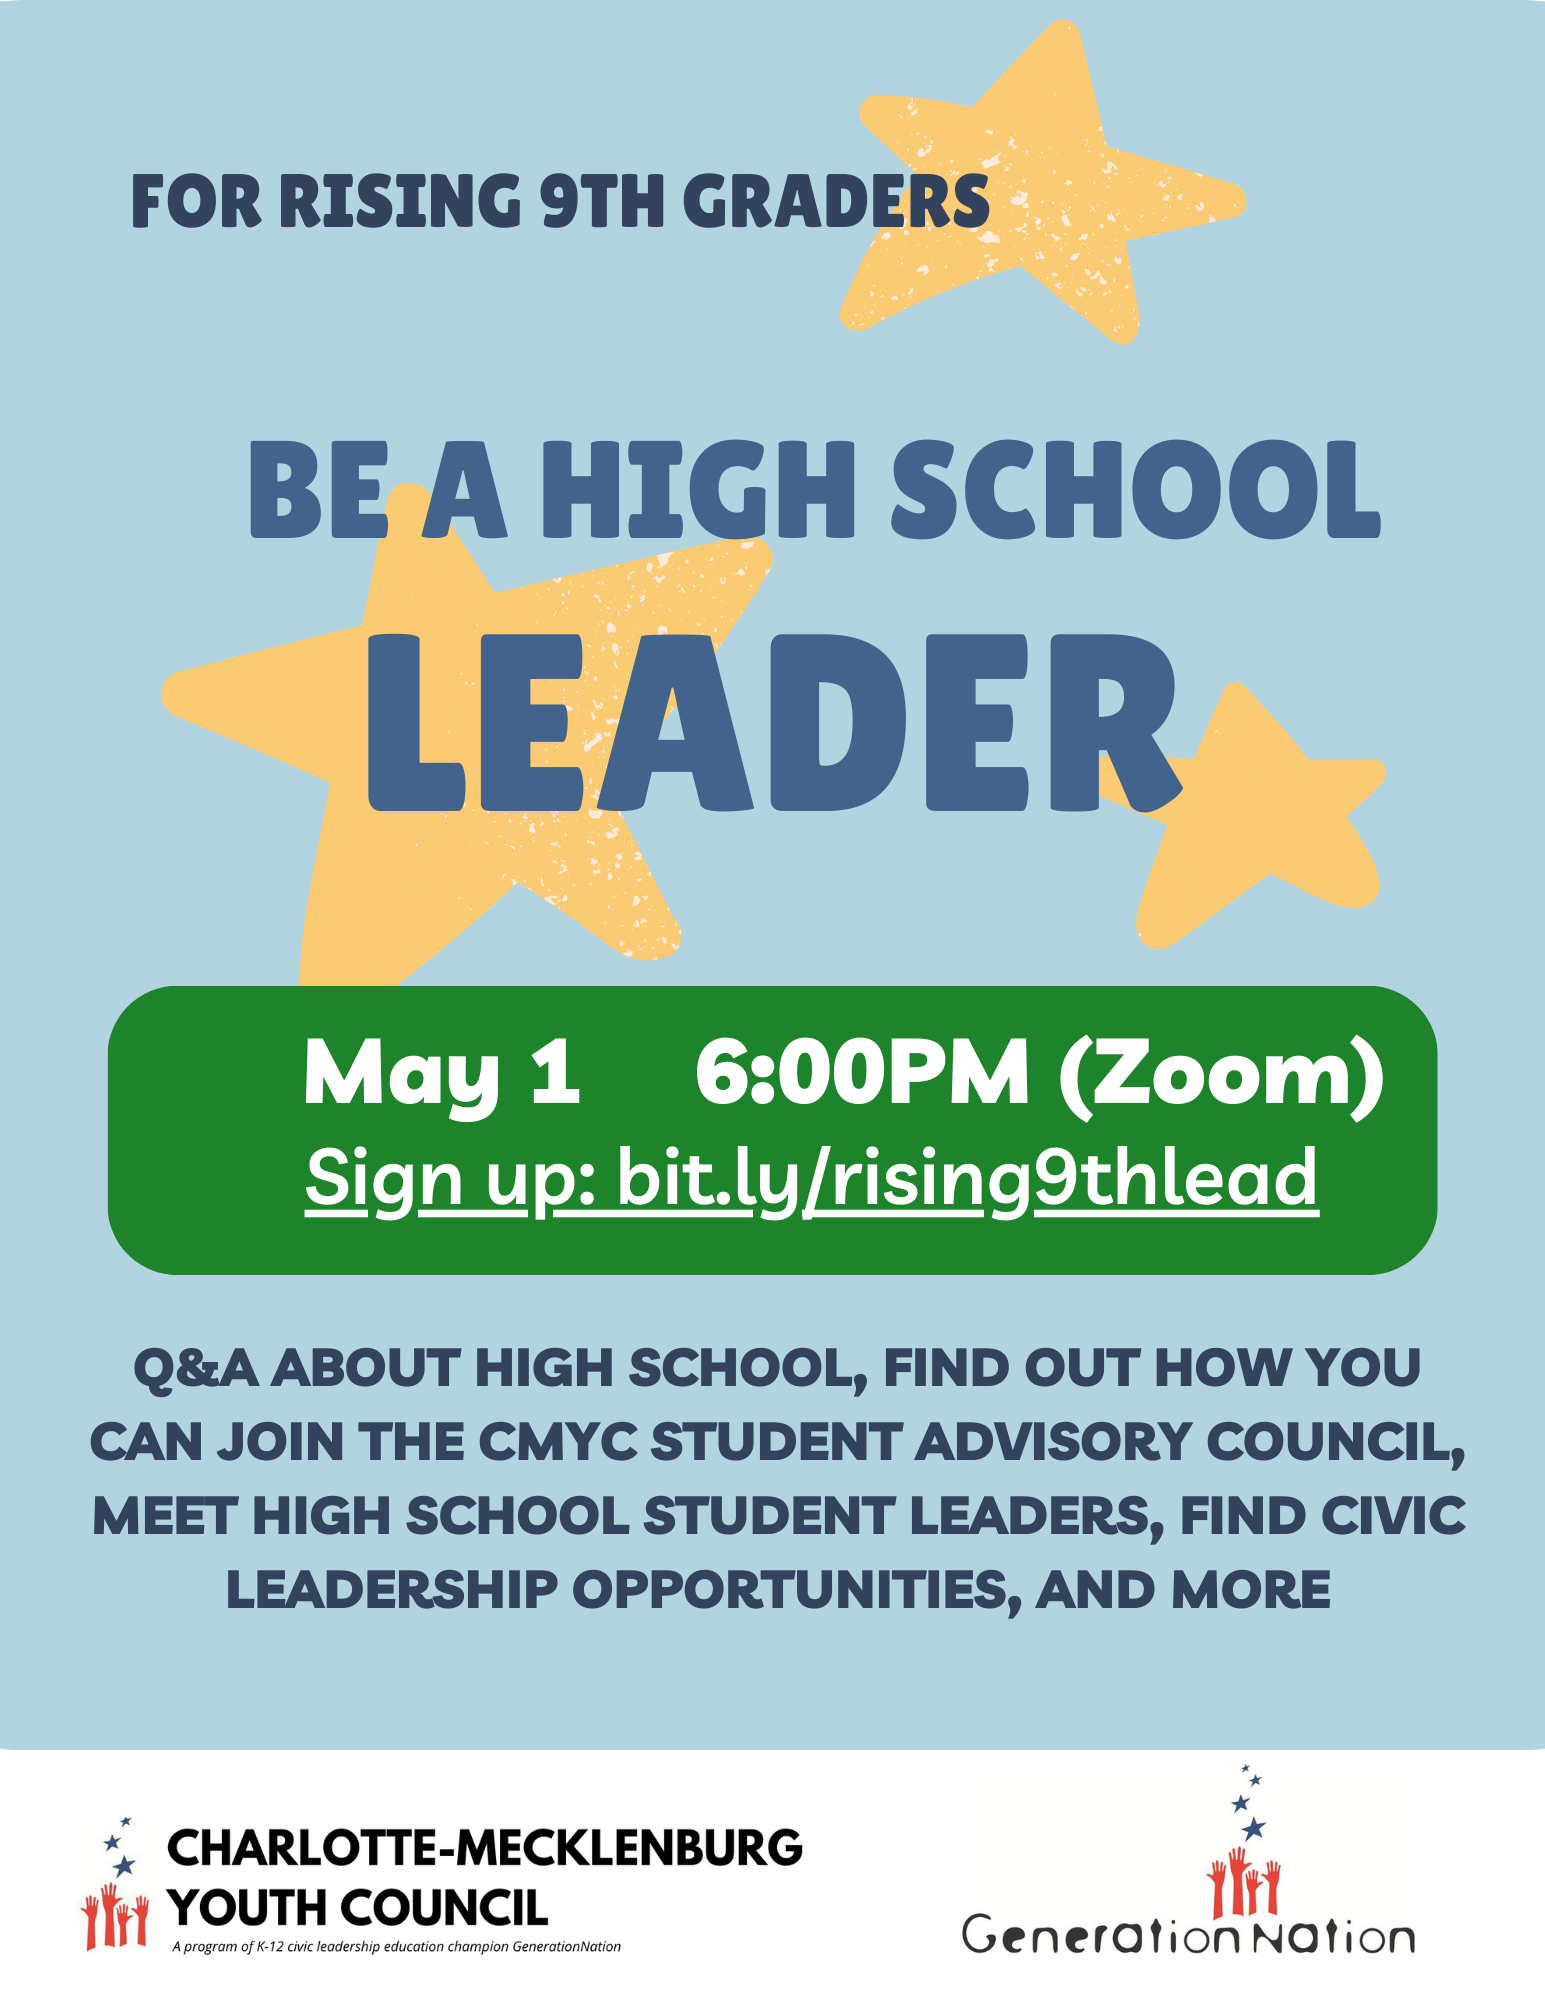 Be a leader in high school